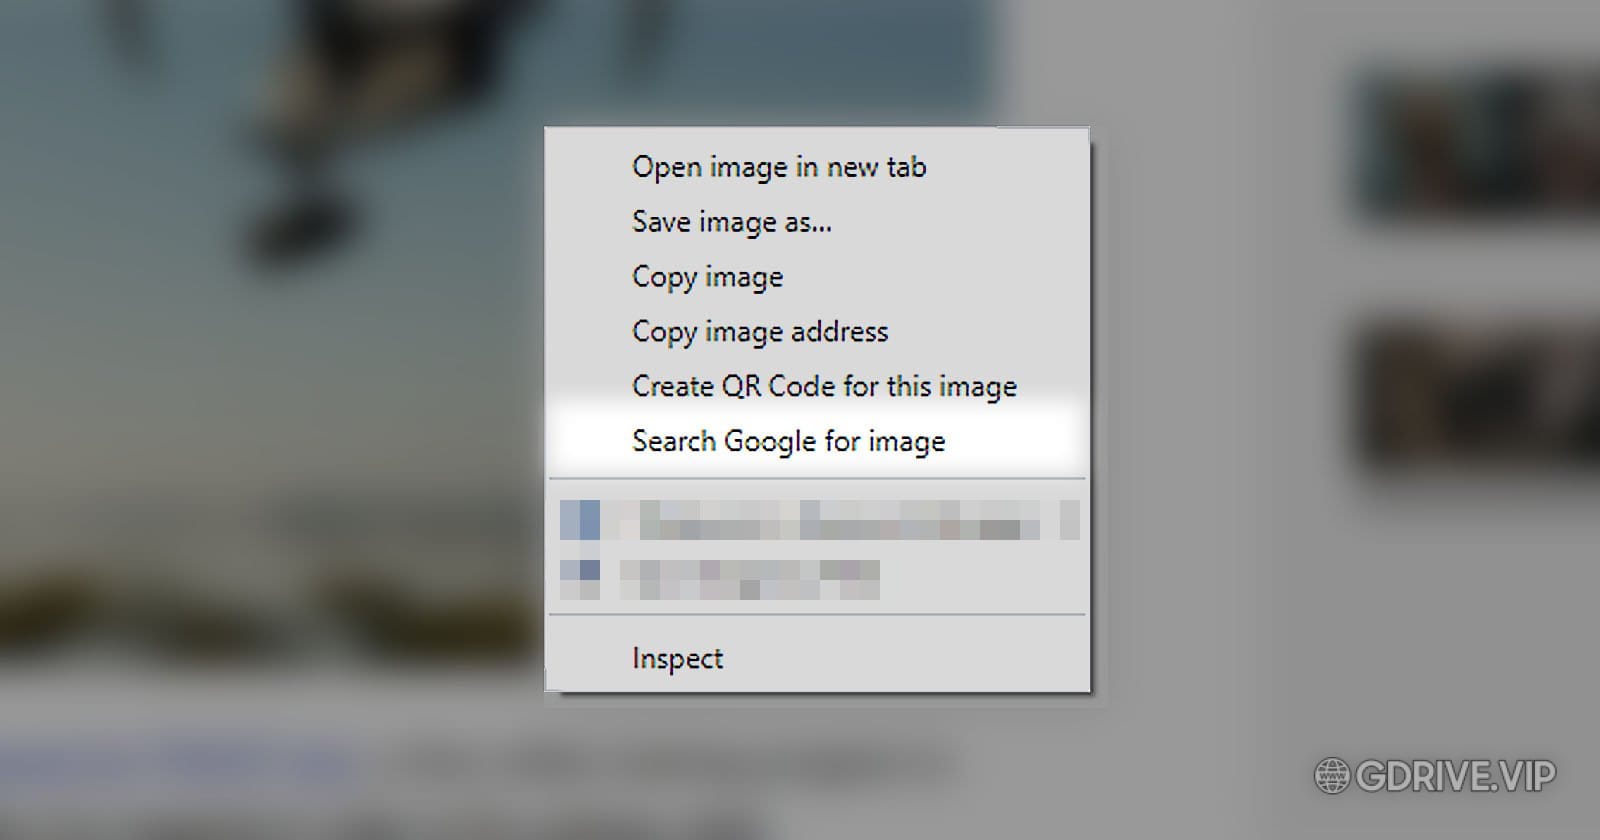 How to Restore Reverse Image Search with Right-Click in Chrome | PetaPixel